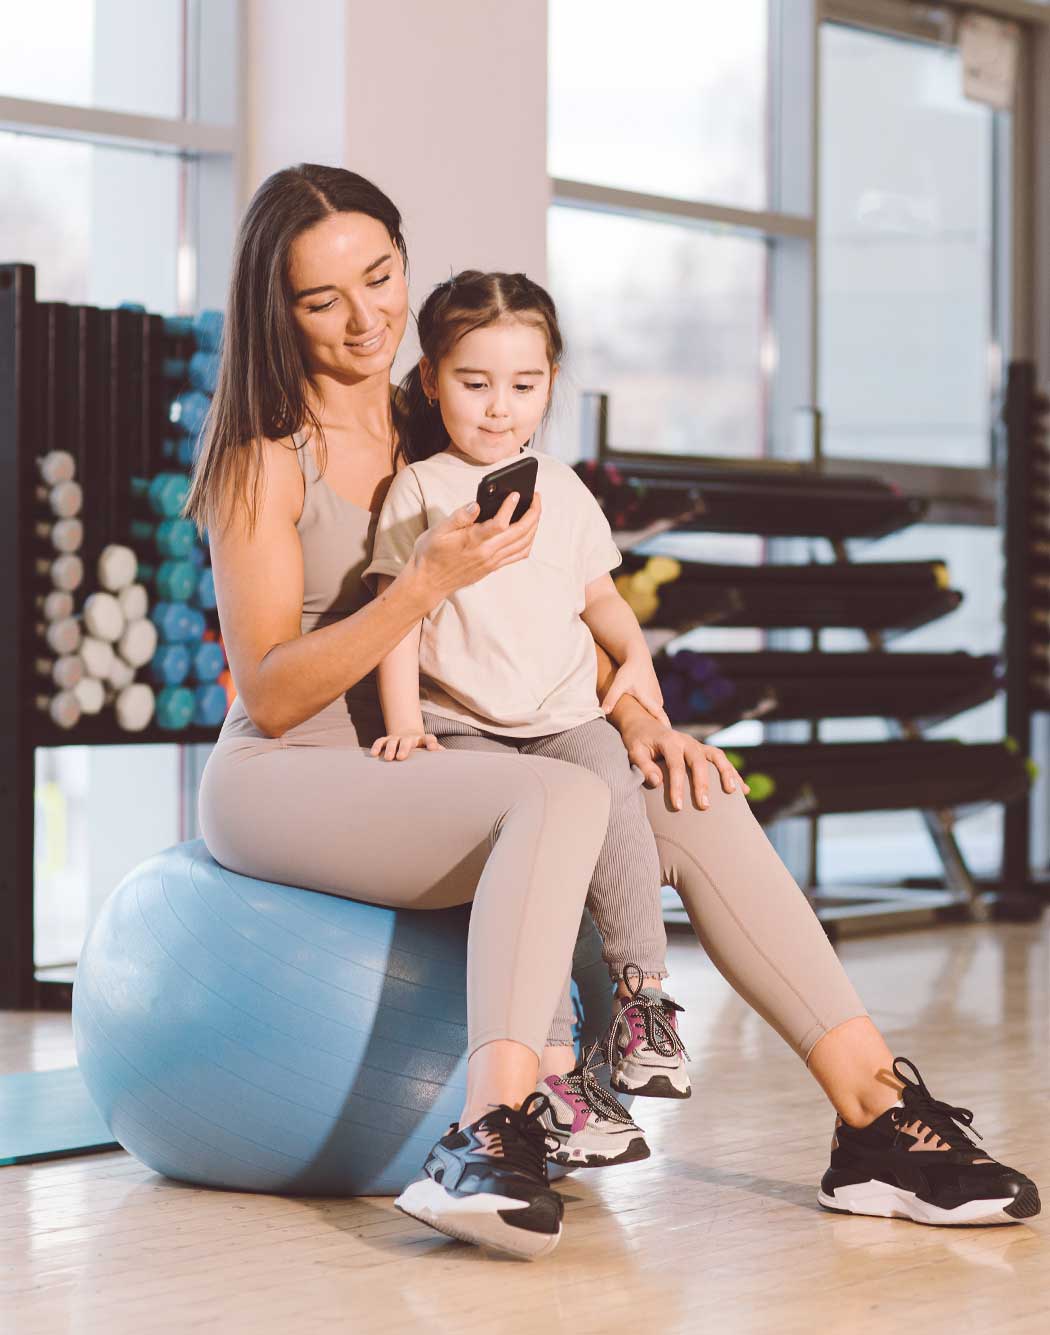 Woman with her daughter at the gym, checking her into childcare on her phone.